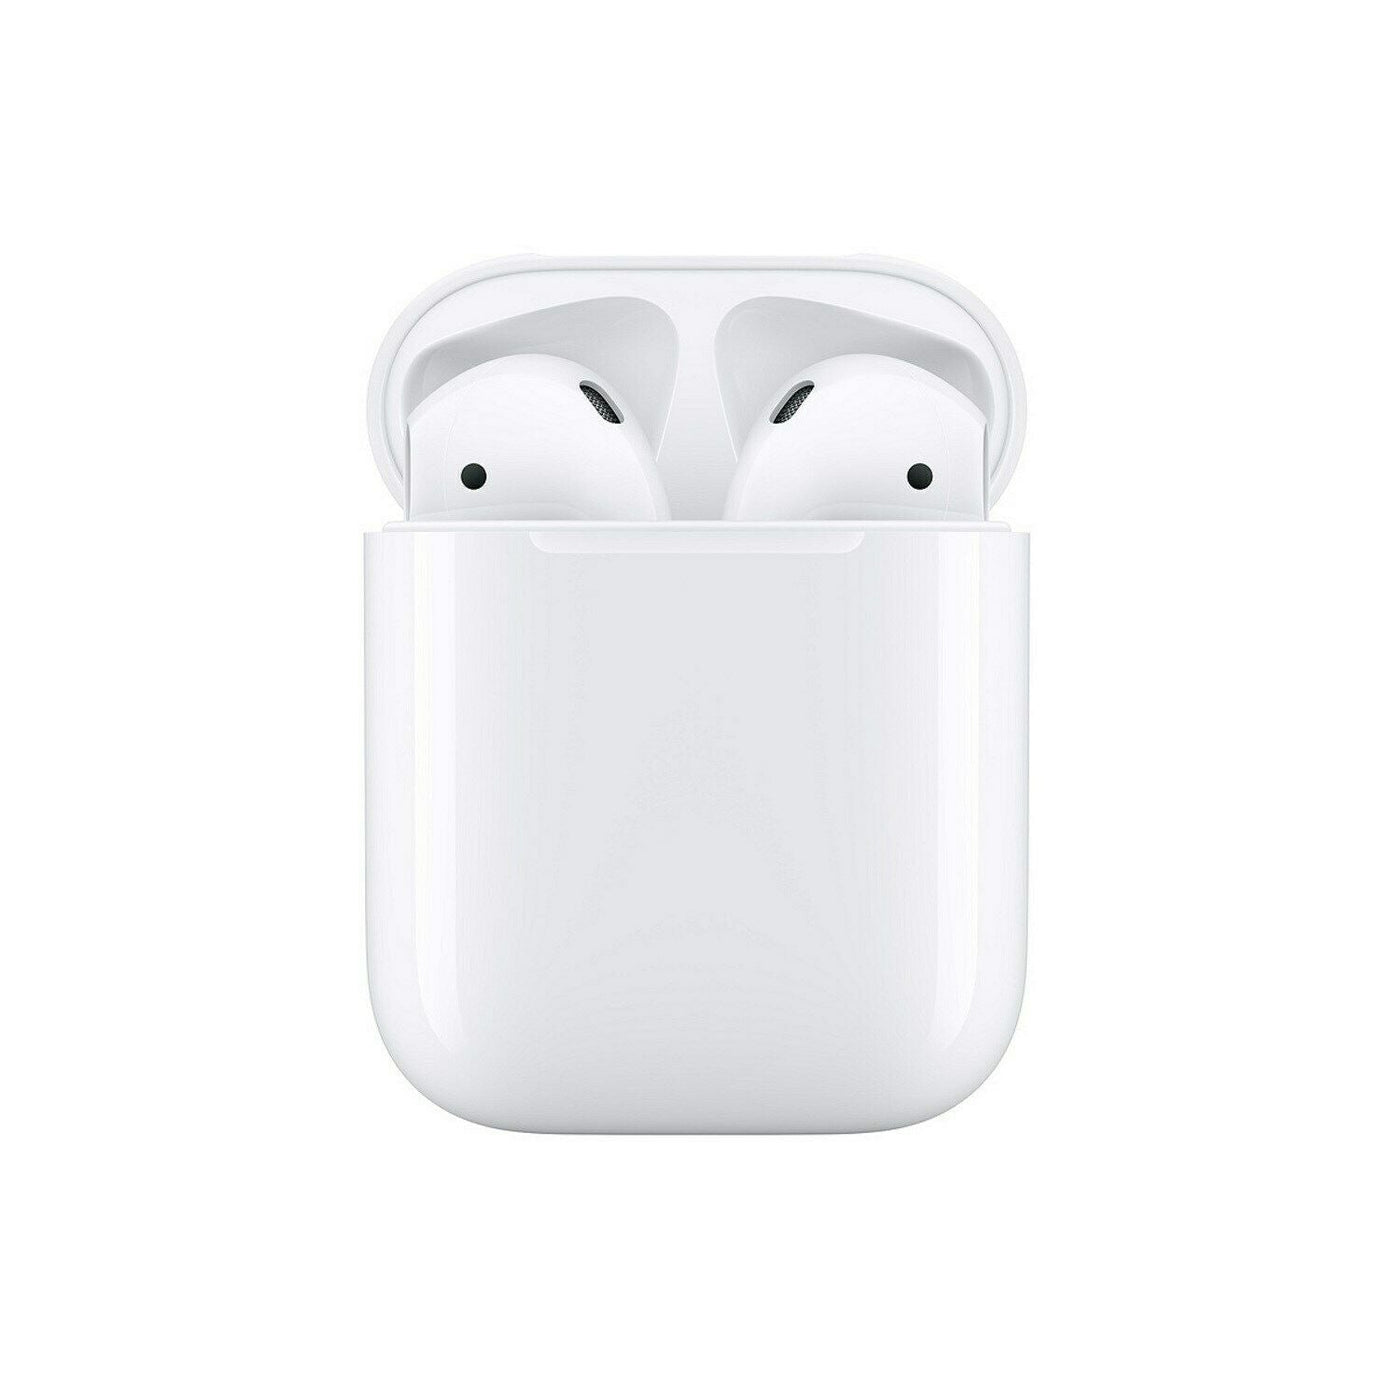 Apple Airpods AirPods (2nd generation)